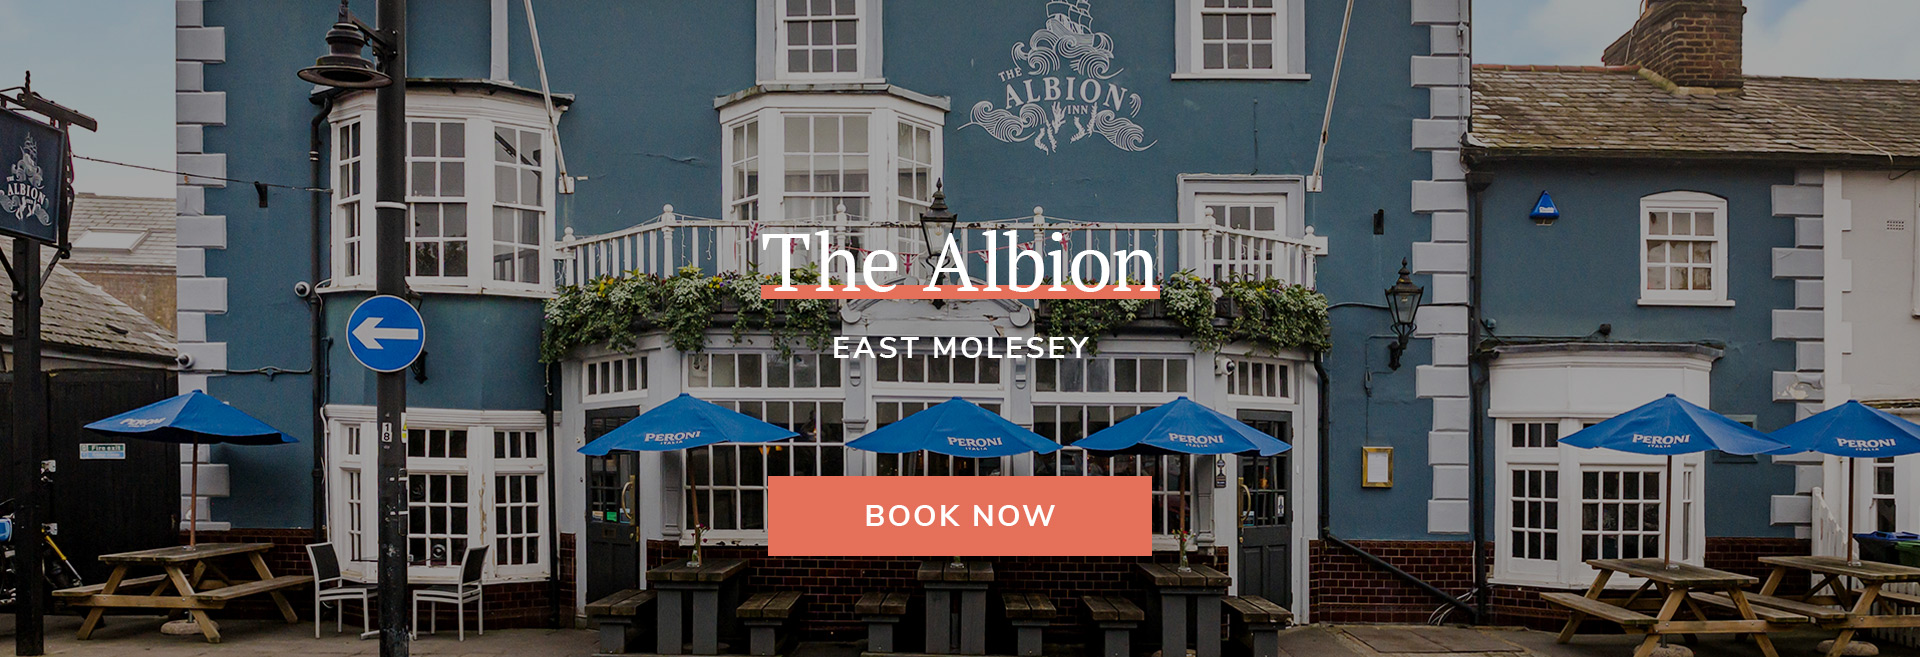 The Albion Hotel Banner 1